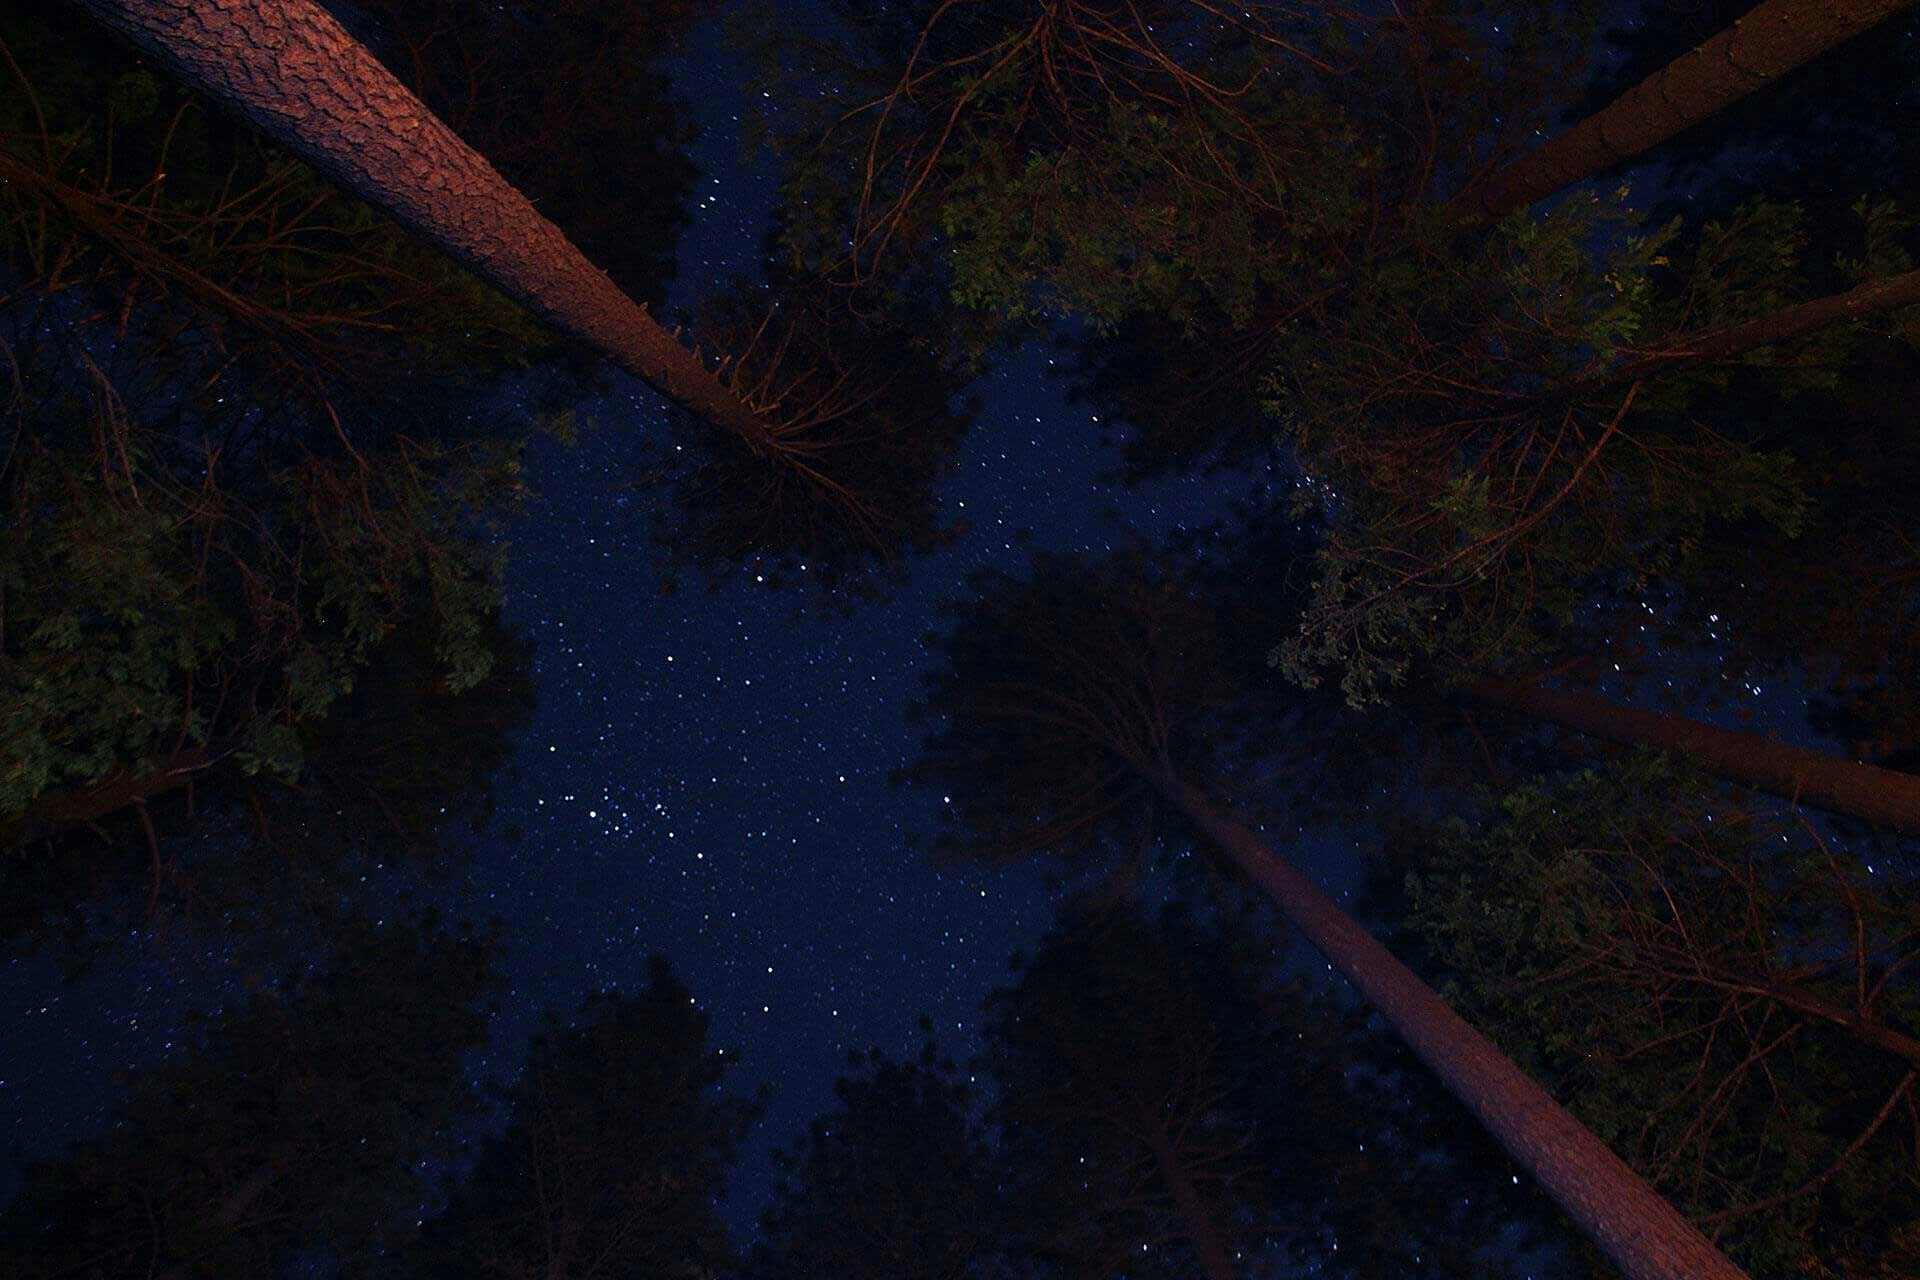 The stars in the sky above trees in a forest